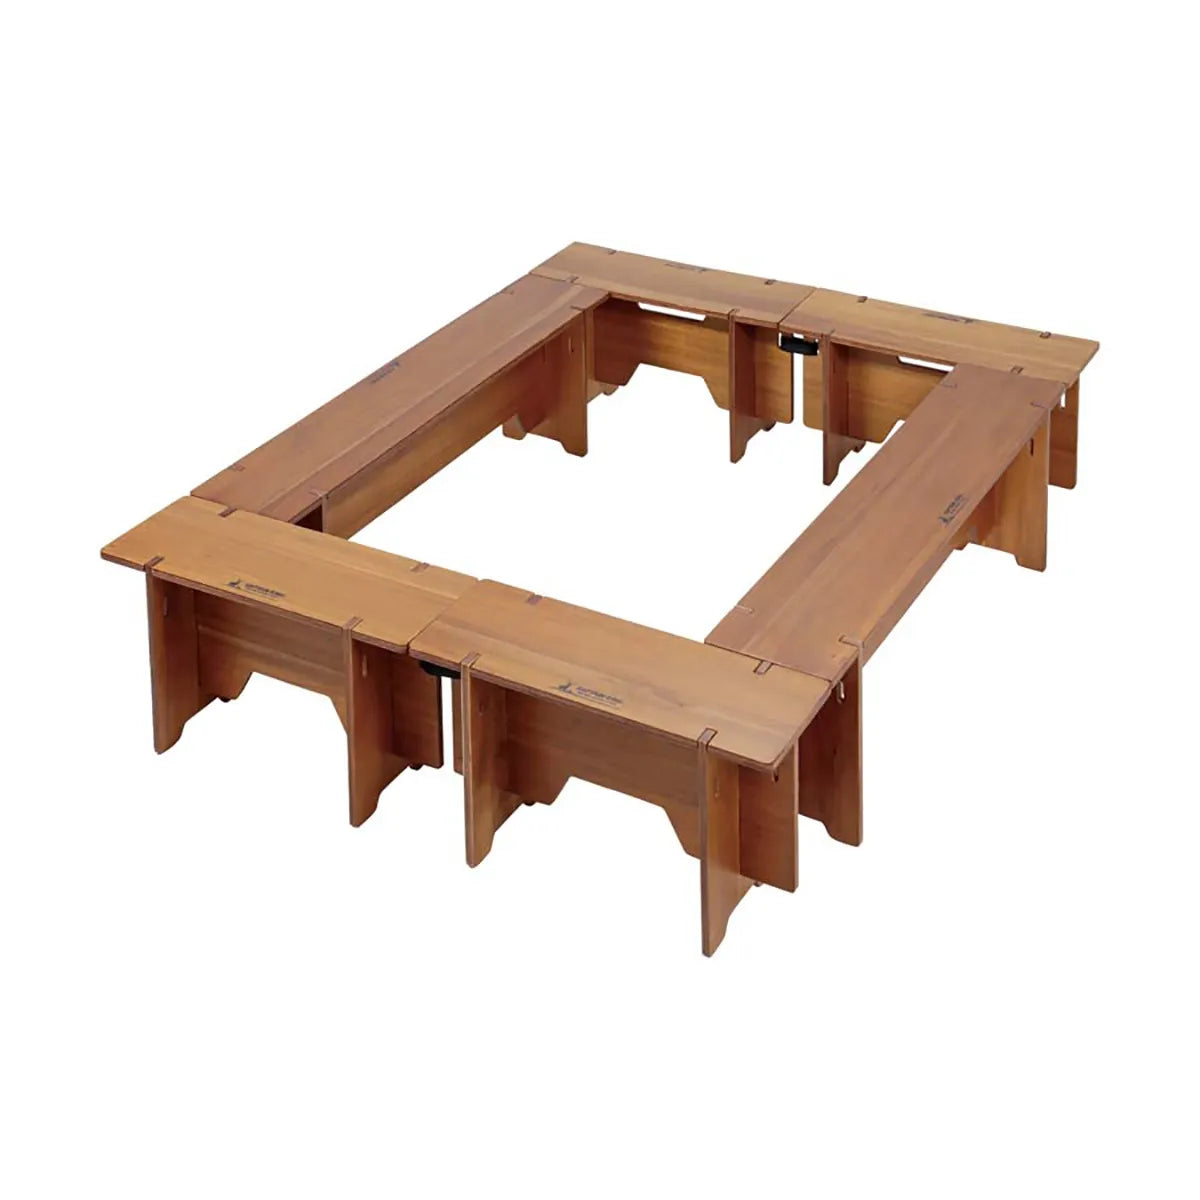 captain-stag-portable-wooden-table-6p-餐桌套裝-up-1048的第1張產品相片